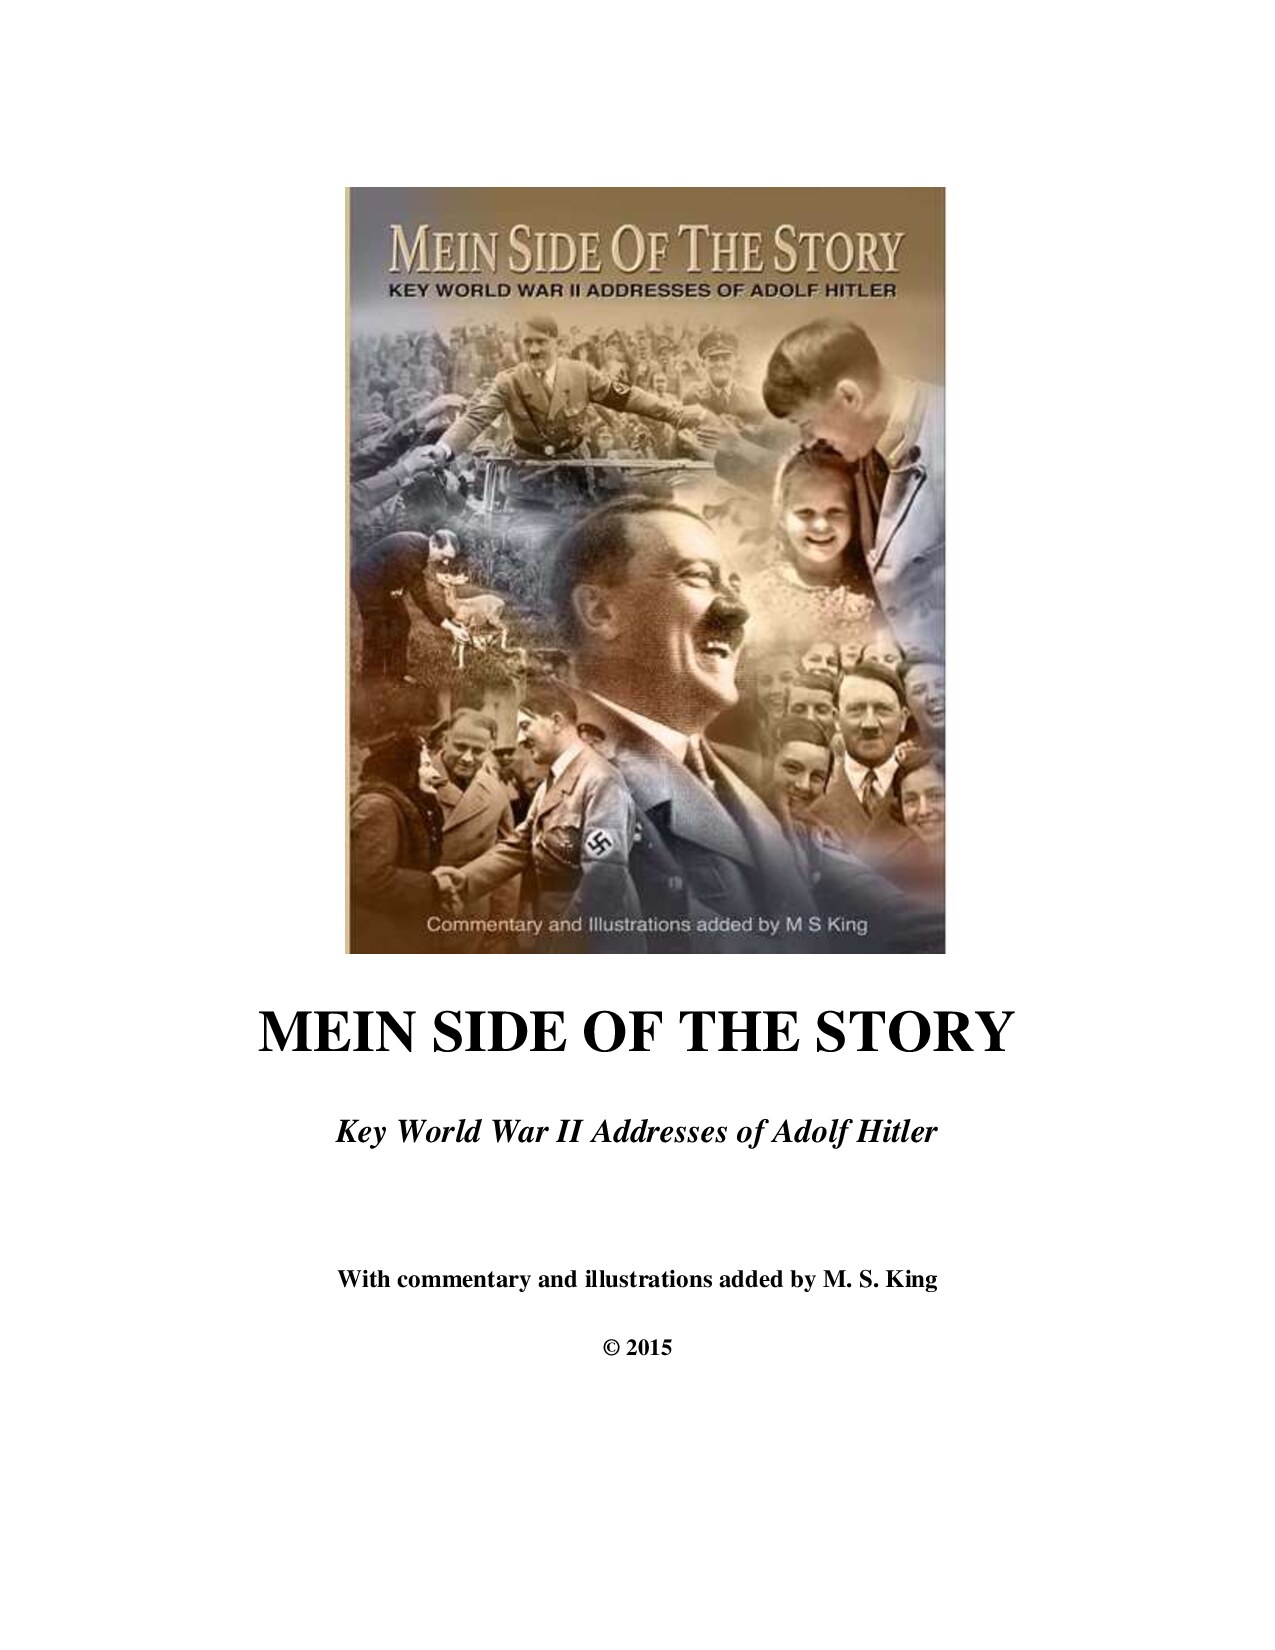 King, Mike S.; Mein Side of the Story; Key World War II Addresses of Adolf Hitler